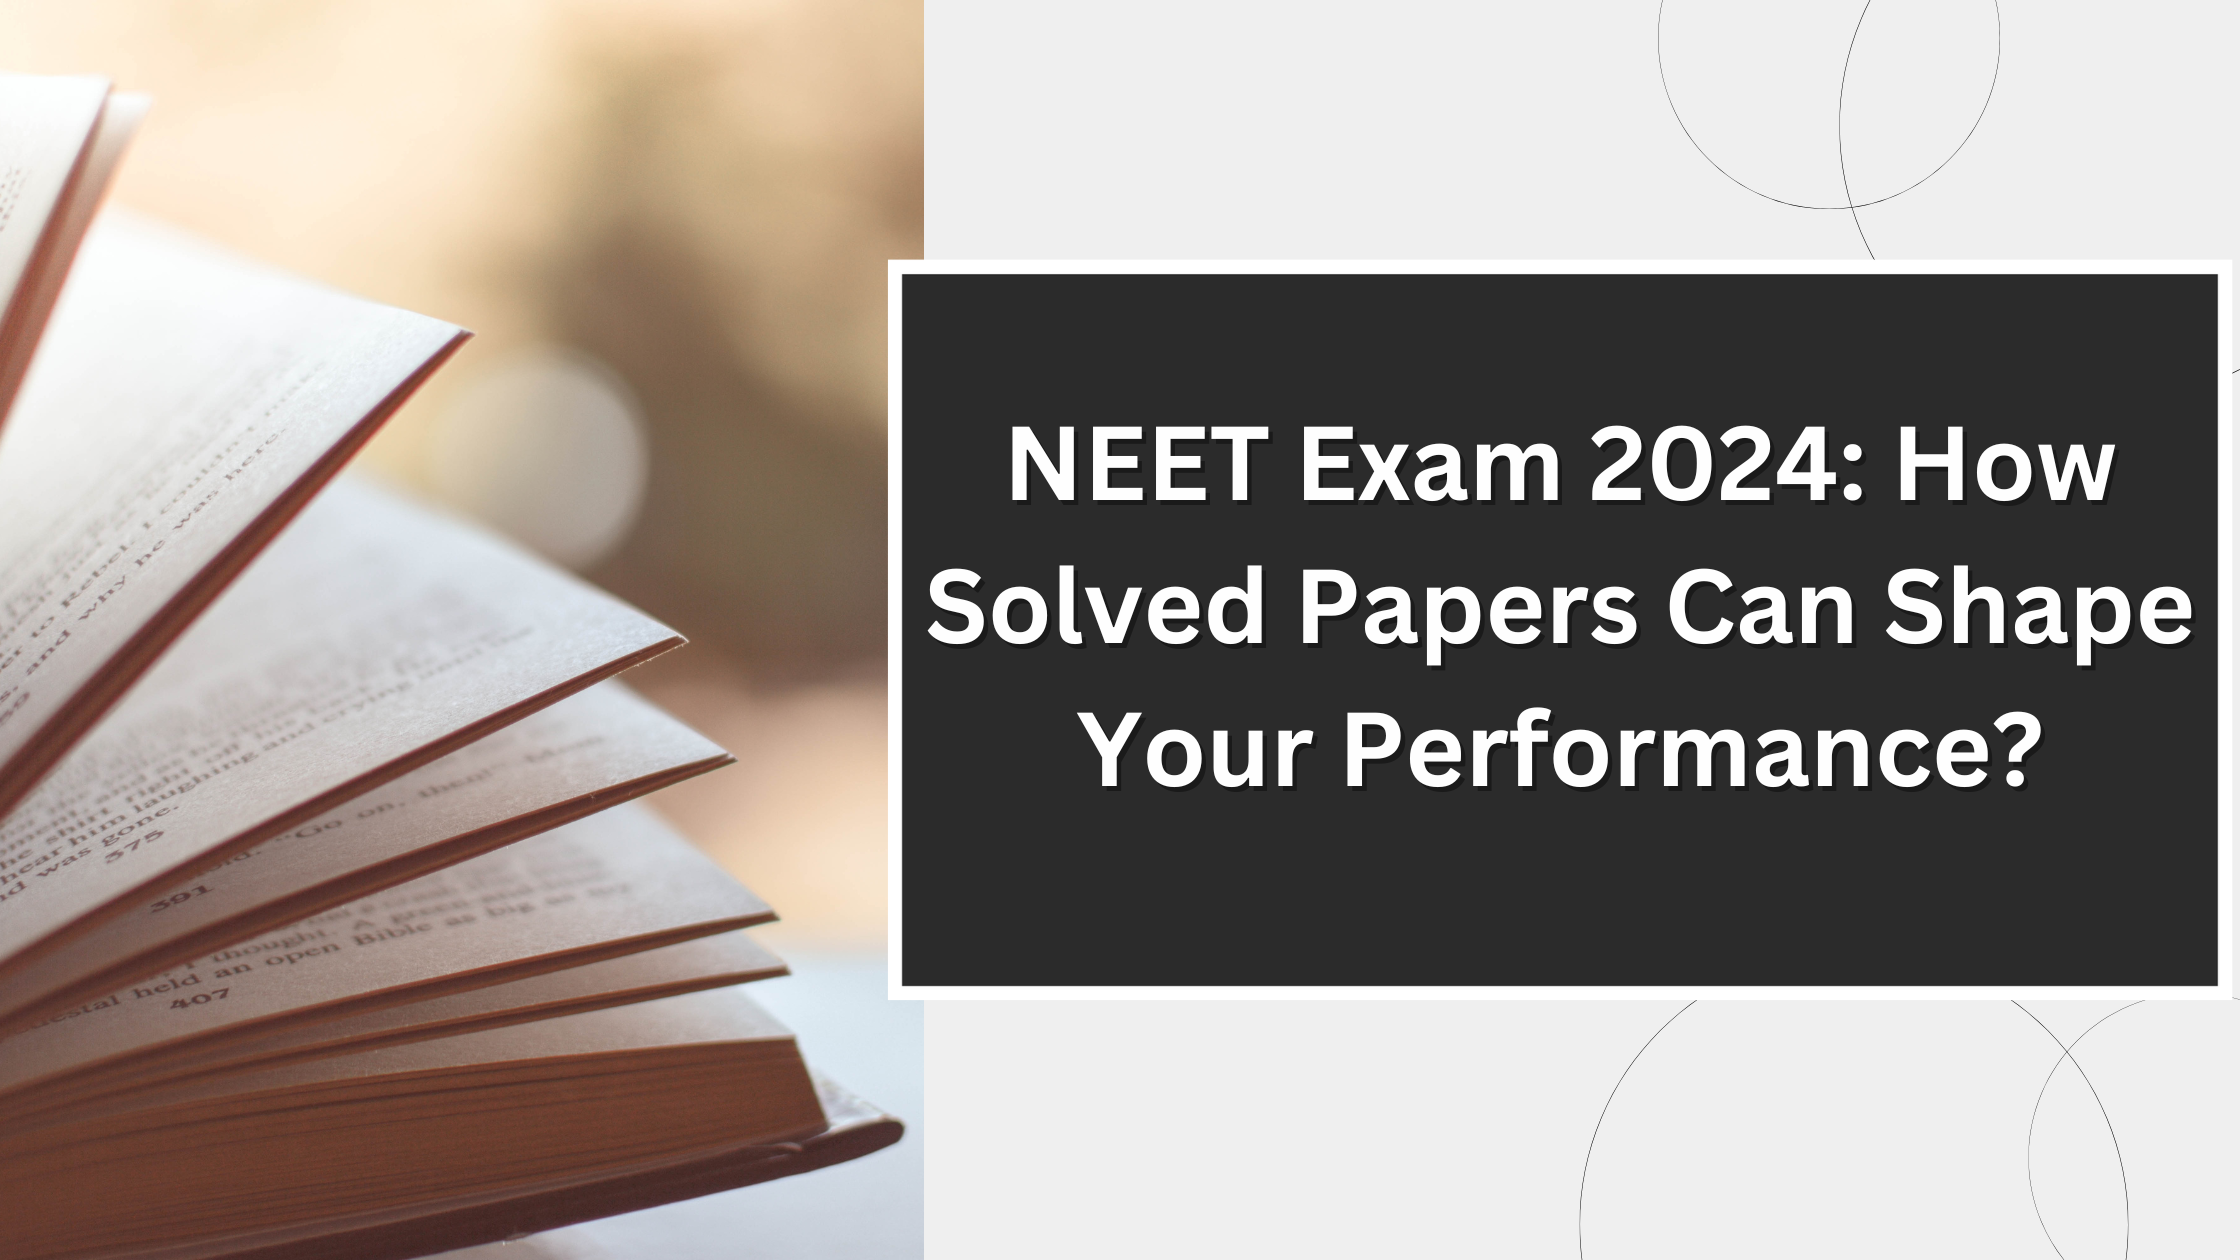 NEET Exam 2024, NEET Previous Year Question Papers for 2024, NEET Mock Test Sample Papers, NEET Books. 